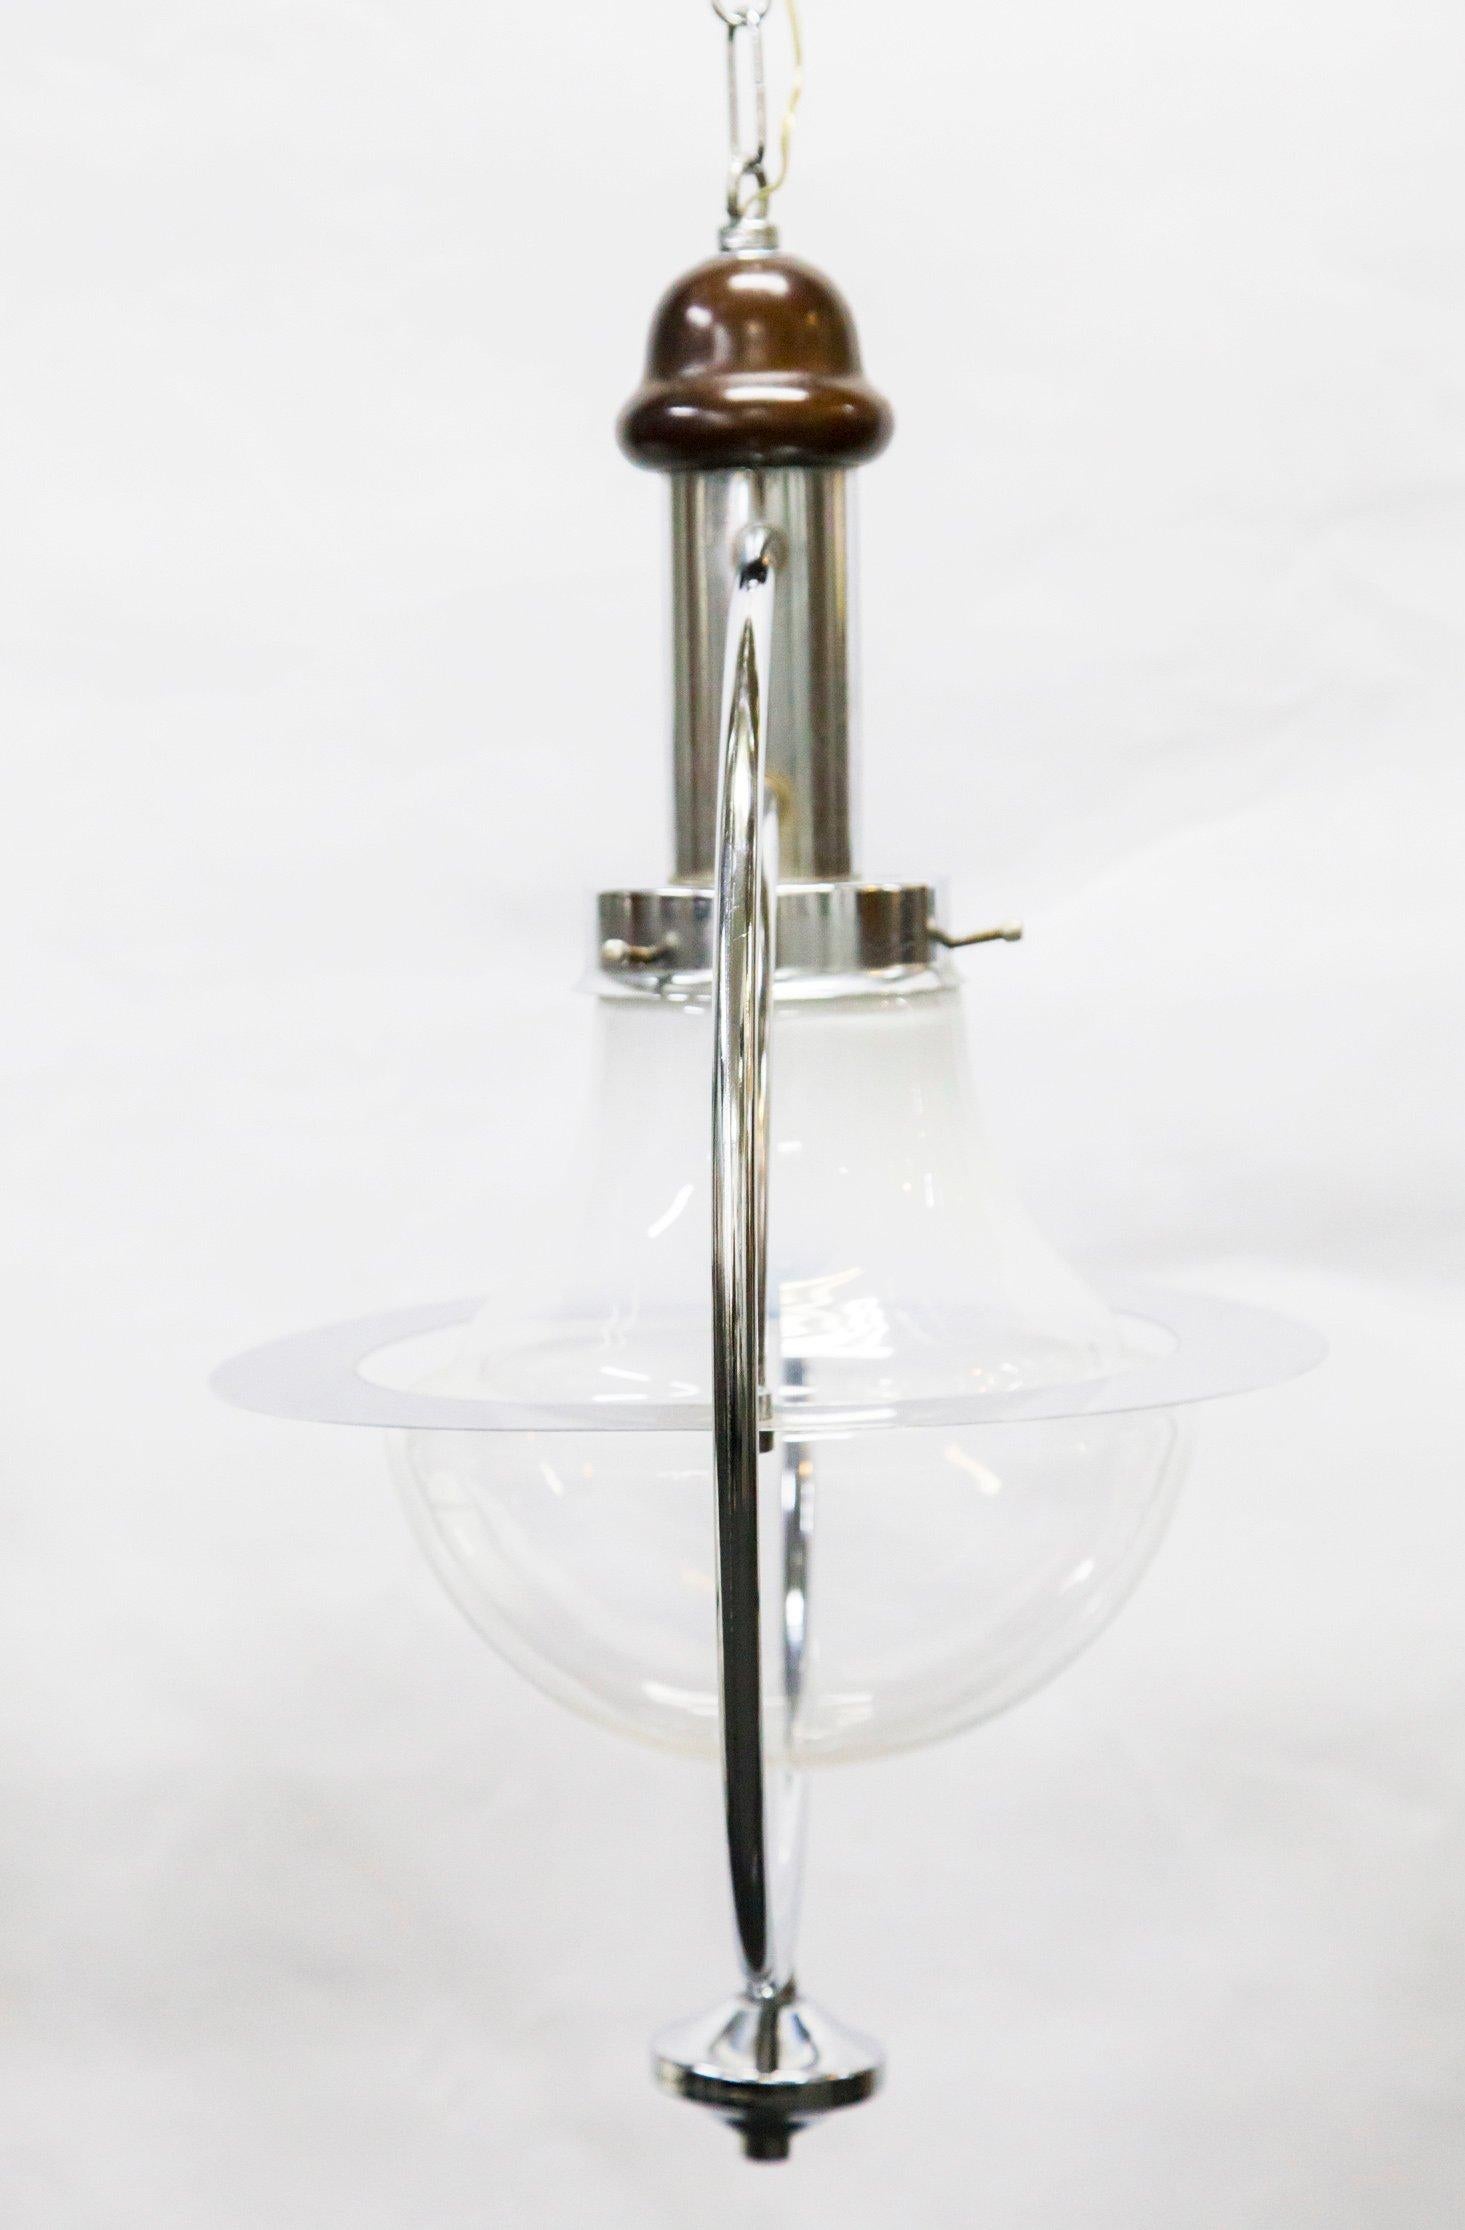 Chrome-plated glass pendant lamp, 1960s.
Murano-style handmade glass pendant lamp with chrome-plated body and wooden accents. Excellent condition.
This item has no defects, but it may show traces of use. Wear consistent with age and use.
 